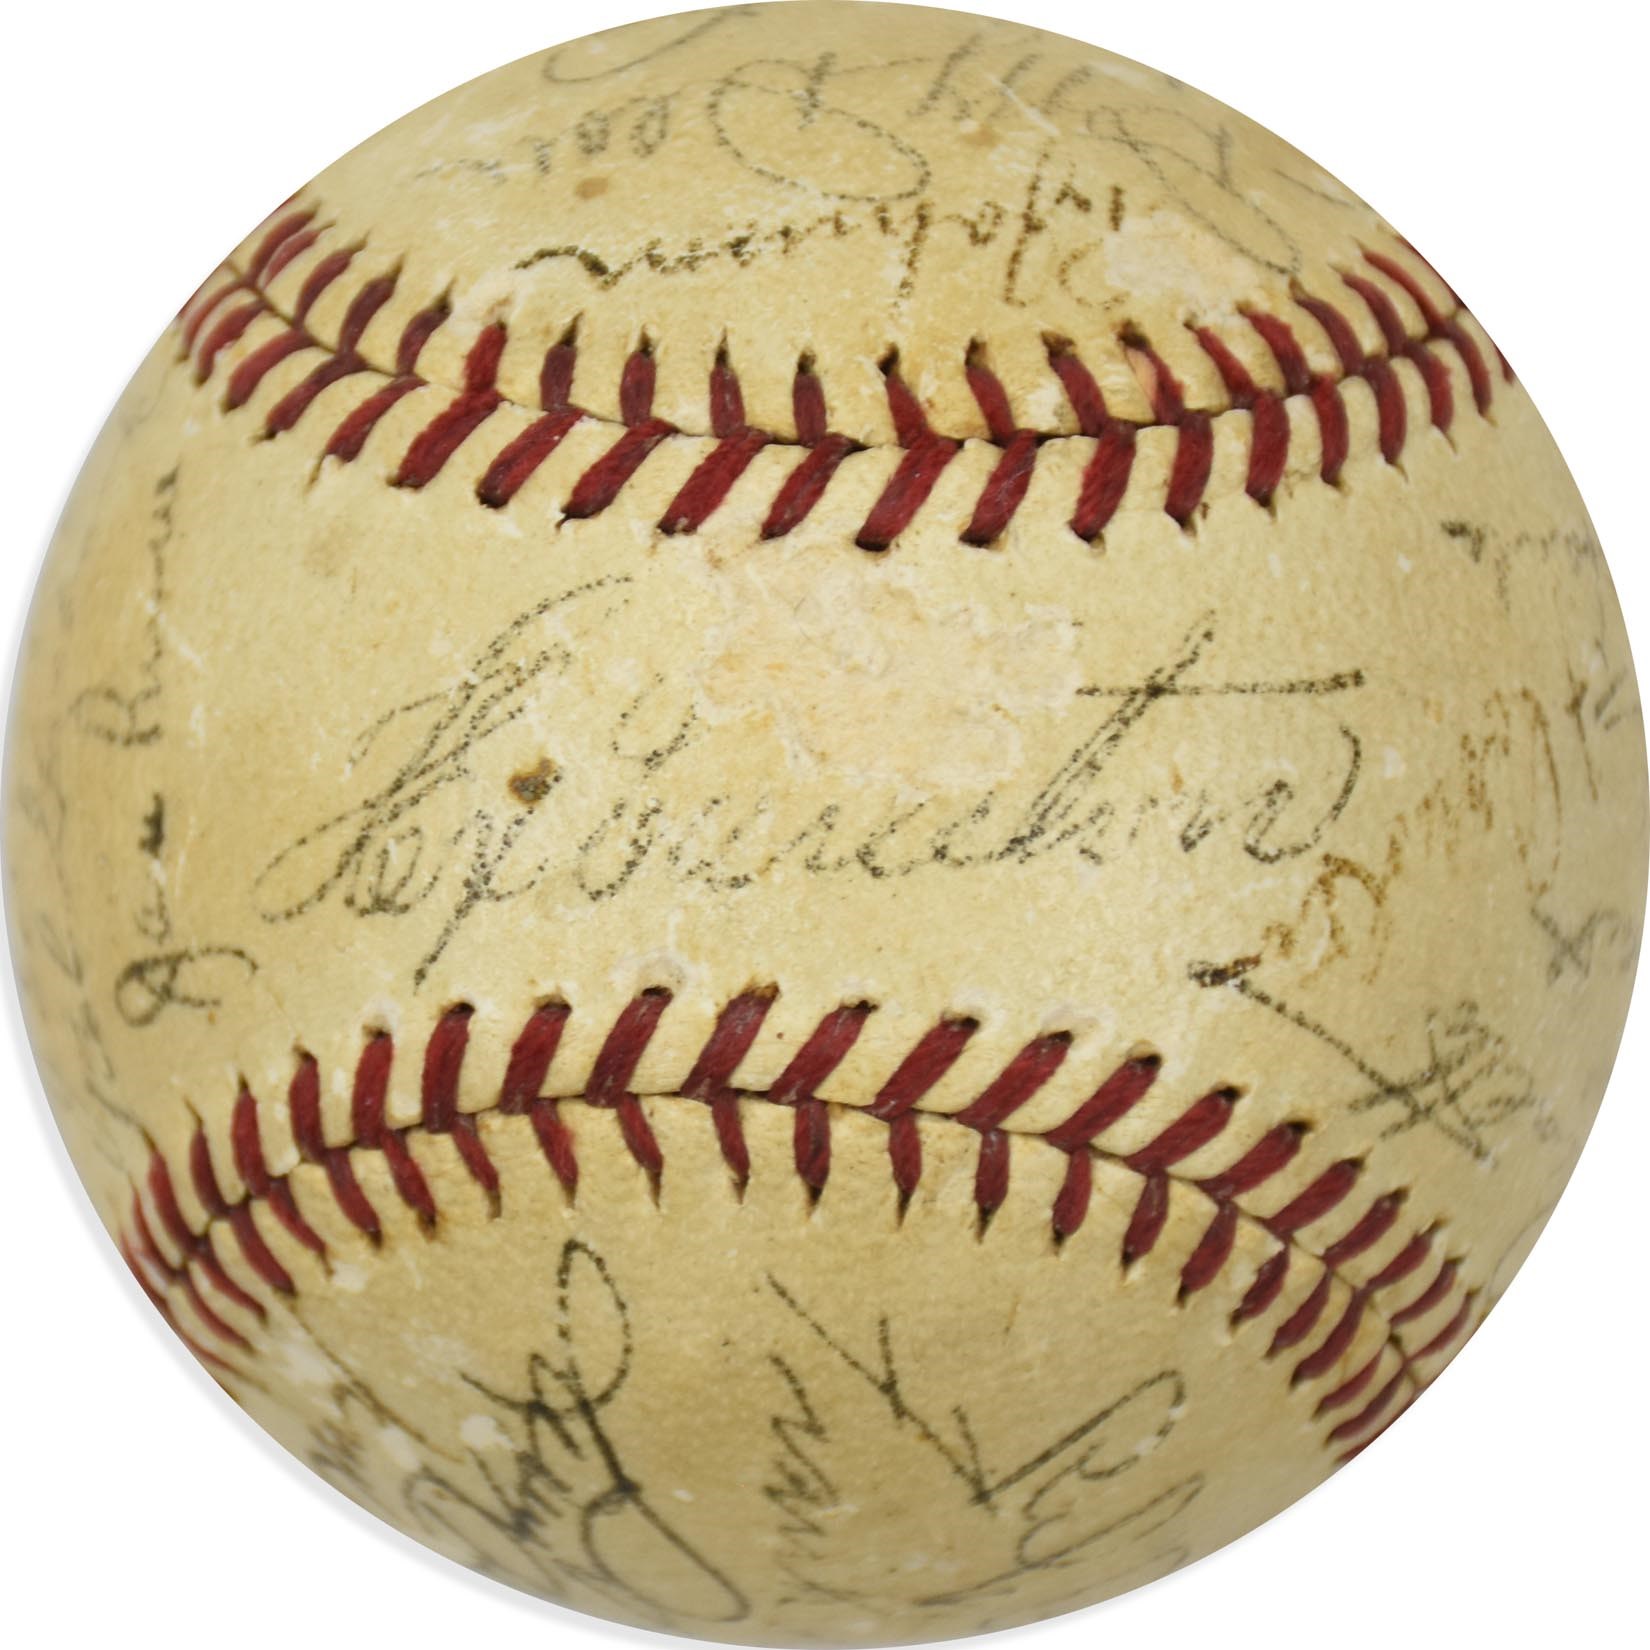 - 1938 Chicago Cubs National League Champions Team-Signed Baseball (PSA)